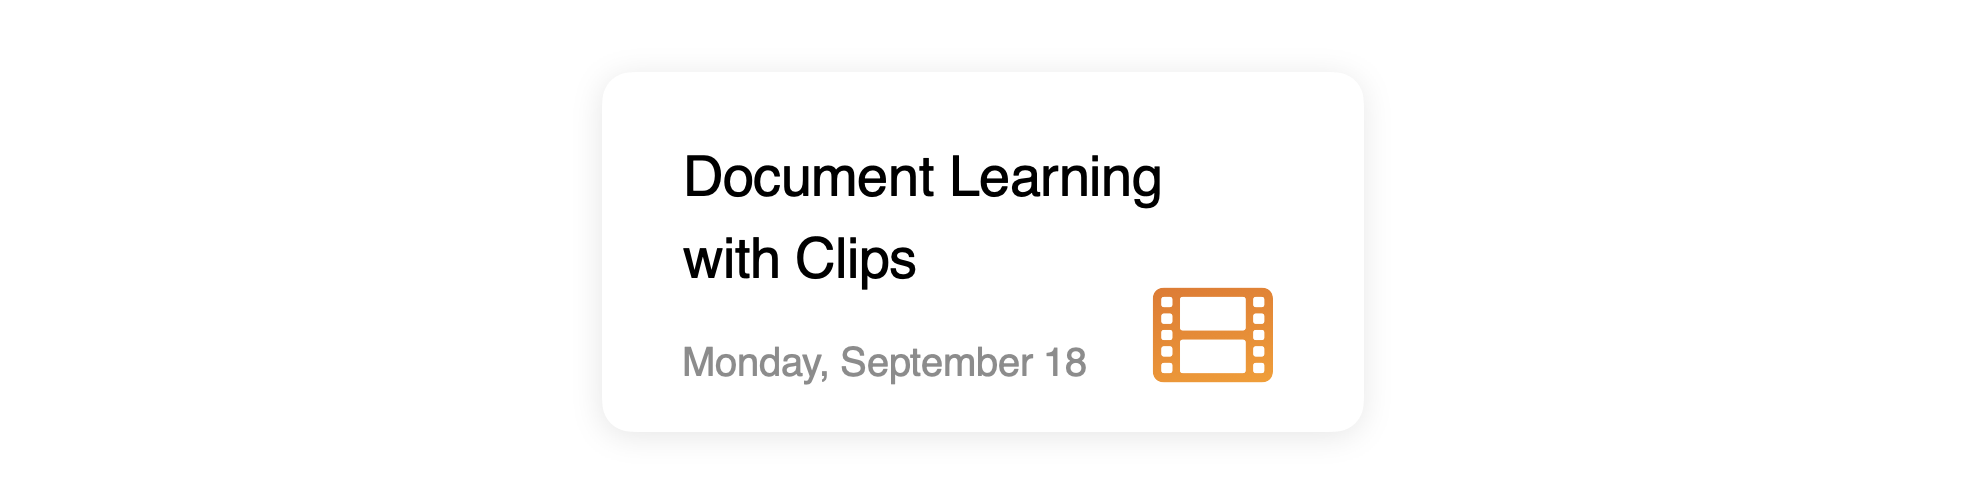 Document Learning with Clips session schedule icon.